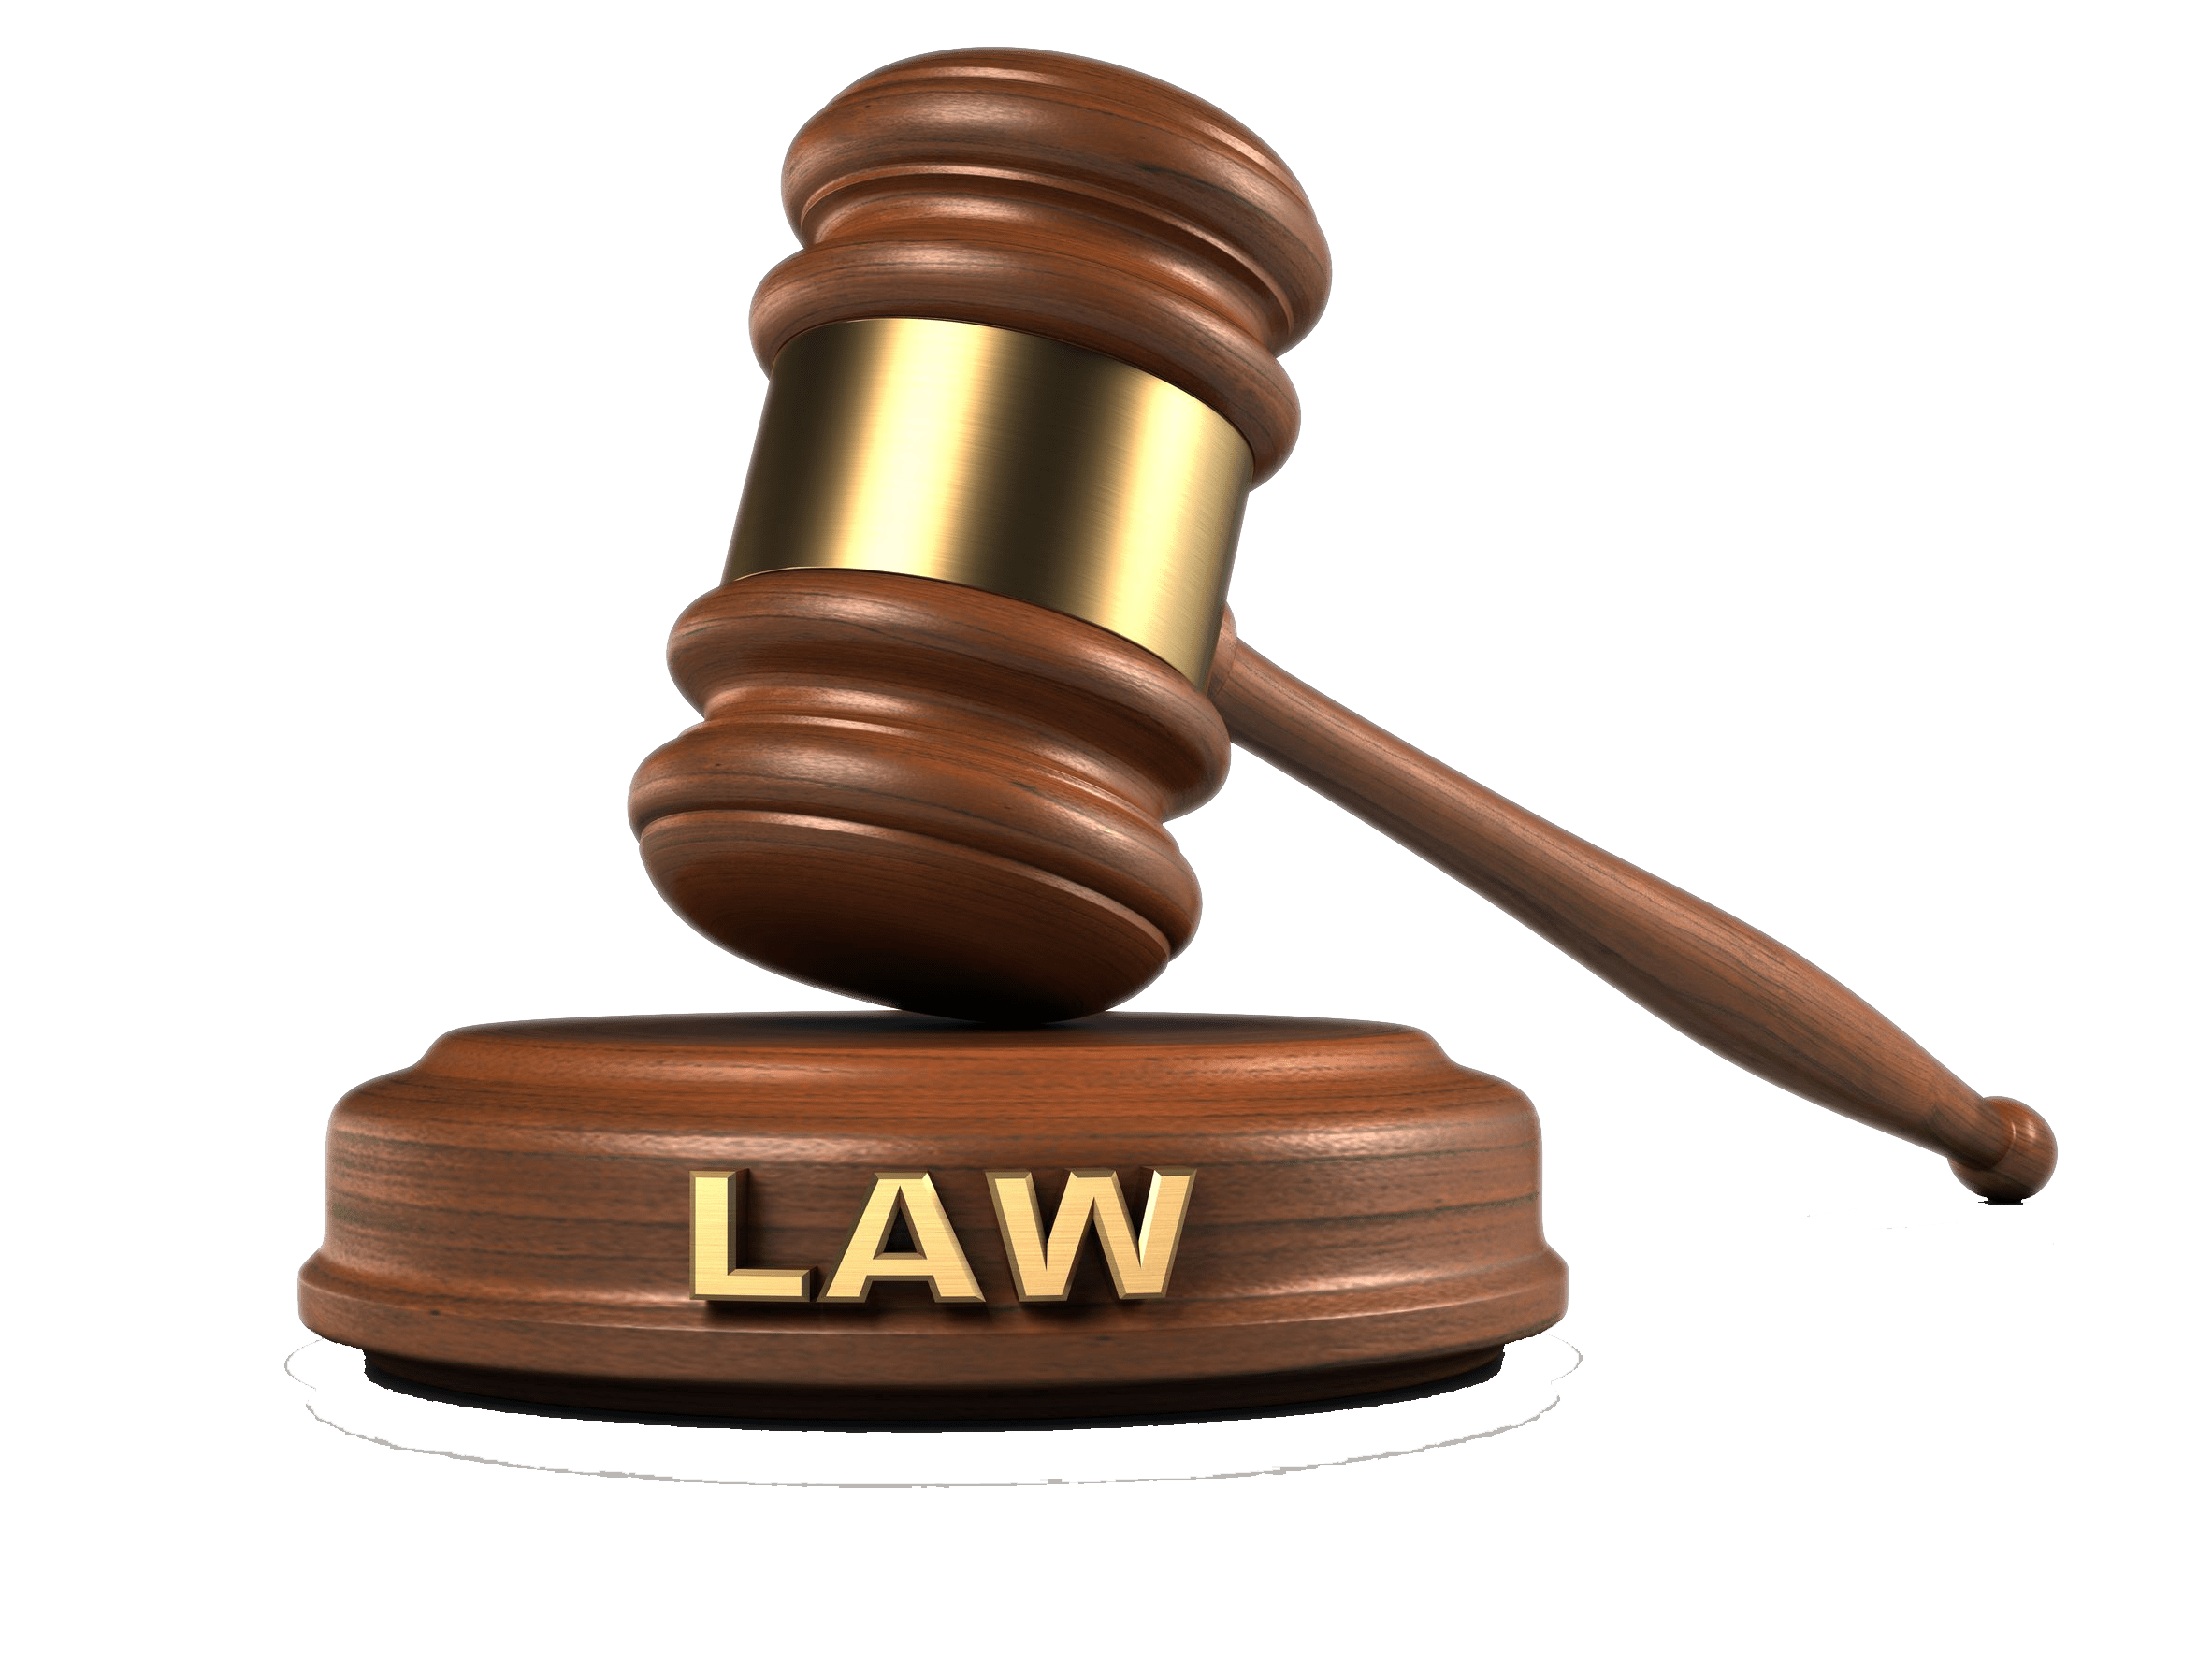 Court revokes bail of 3 robbery suspects